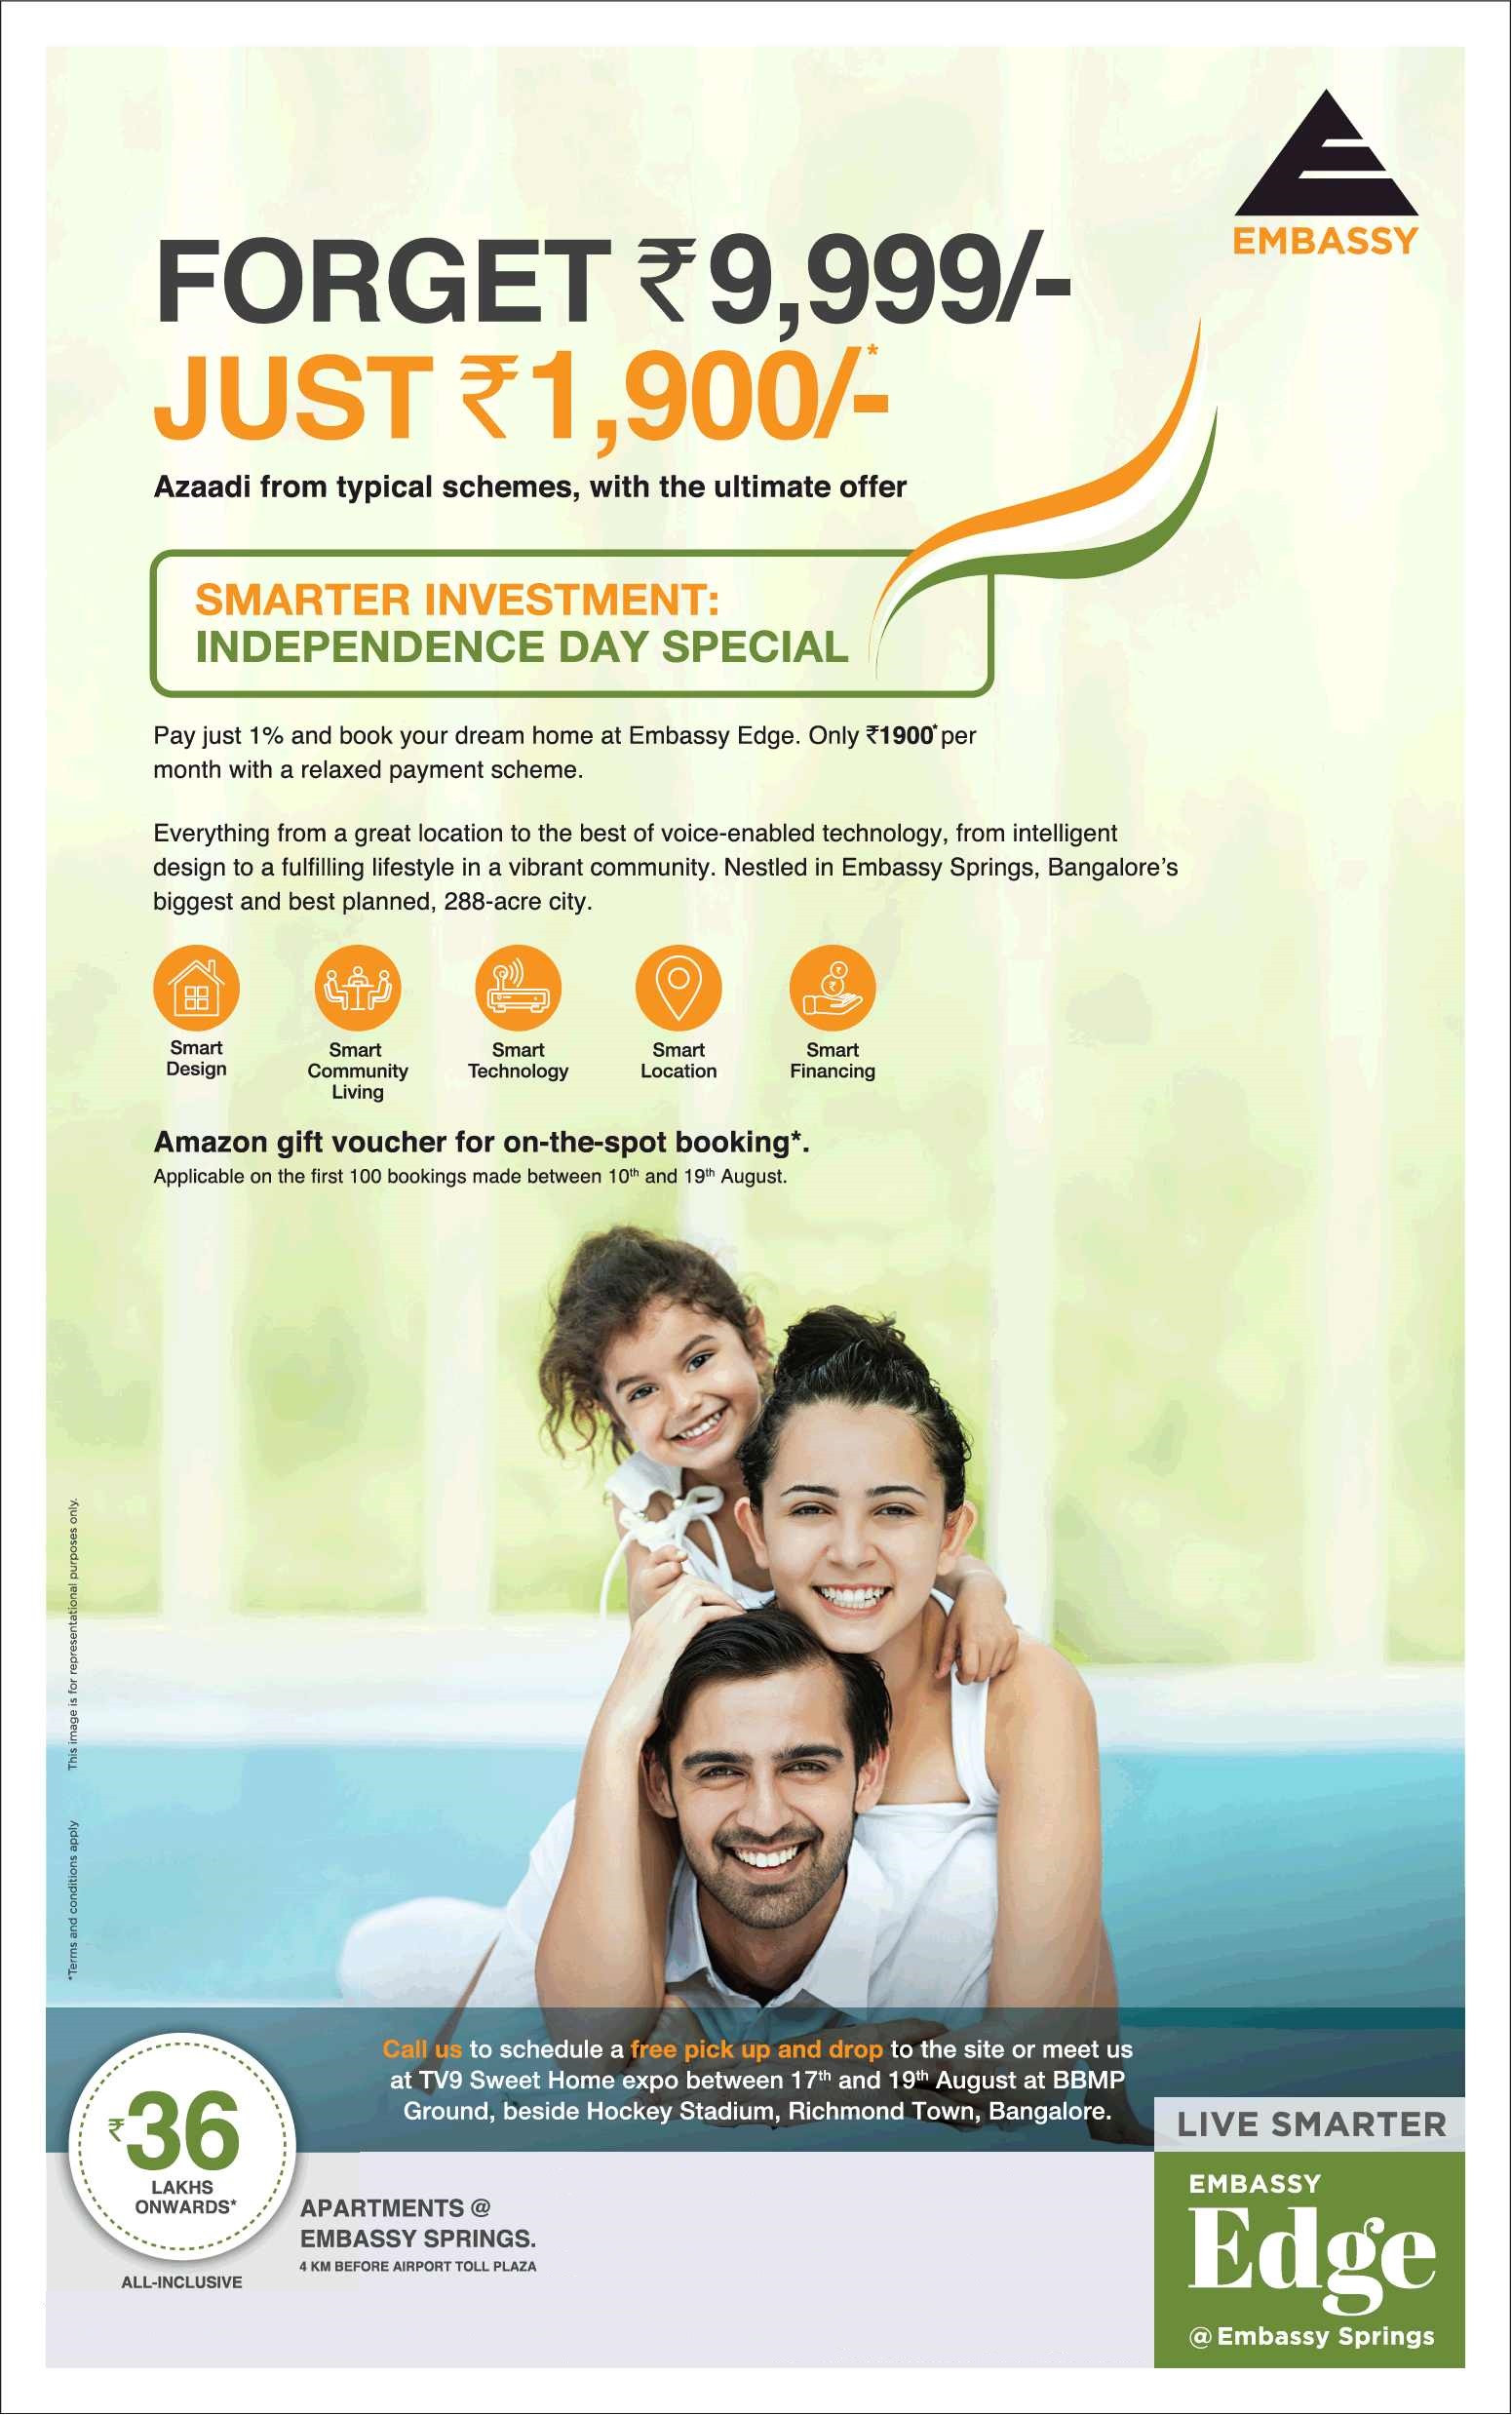 Pay just 1% & book your dream home at Embassy Edge in Bangalore Update